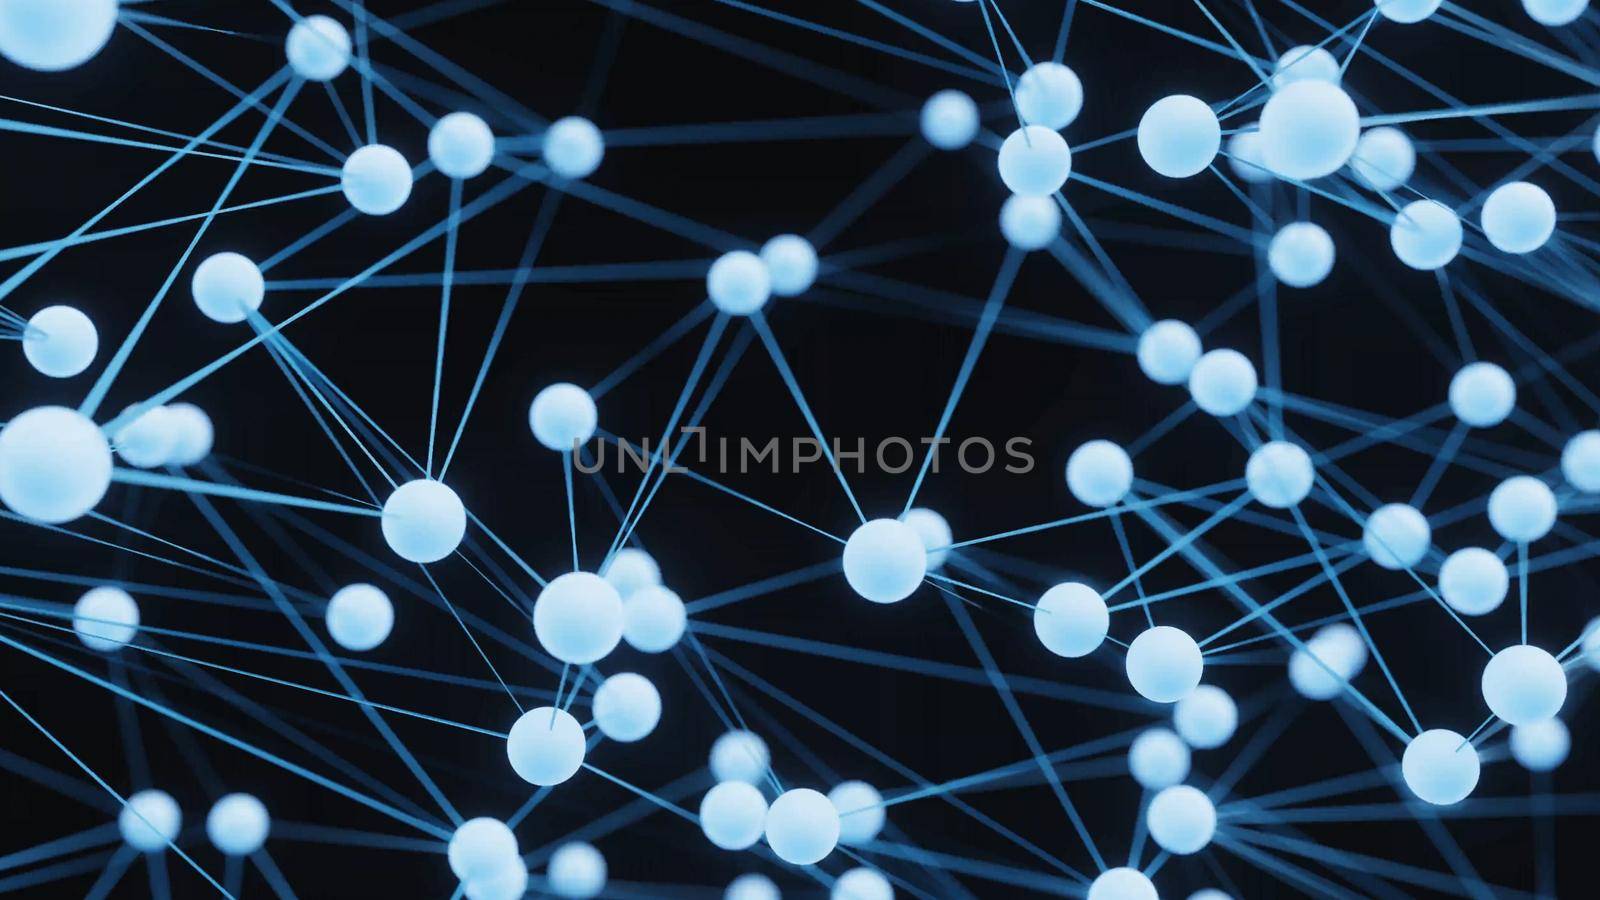 Chaotic structure plexus network node mesh background. Abstract and science technology concept. 3D illustration rendering